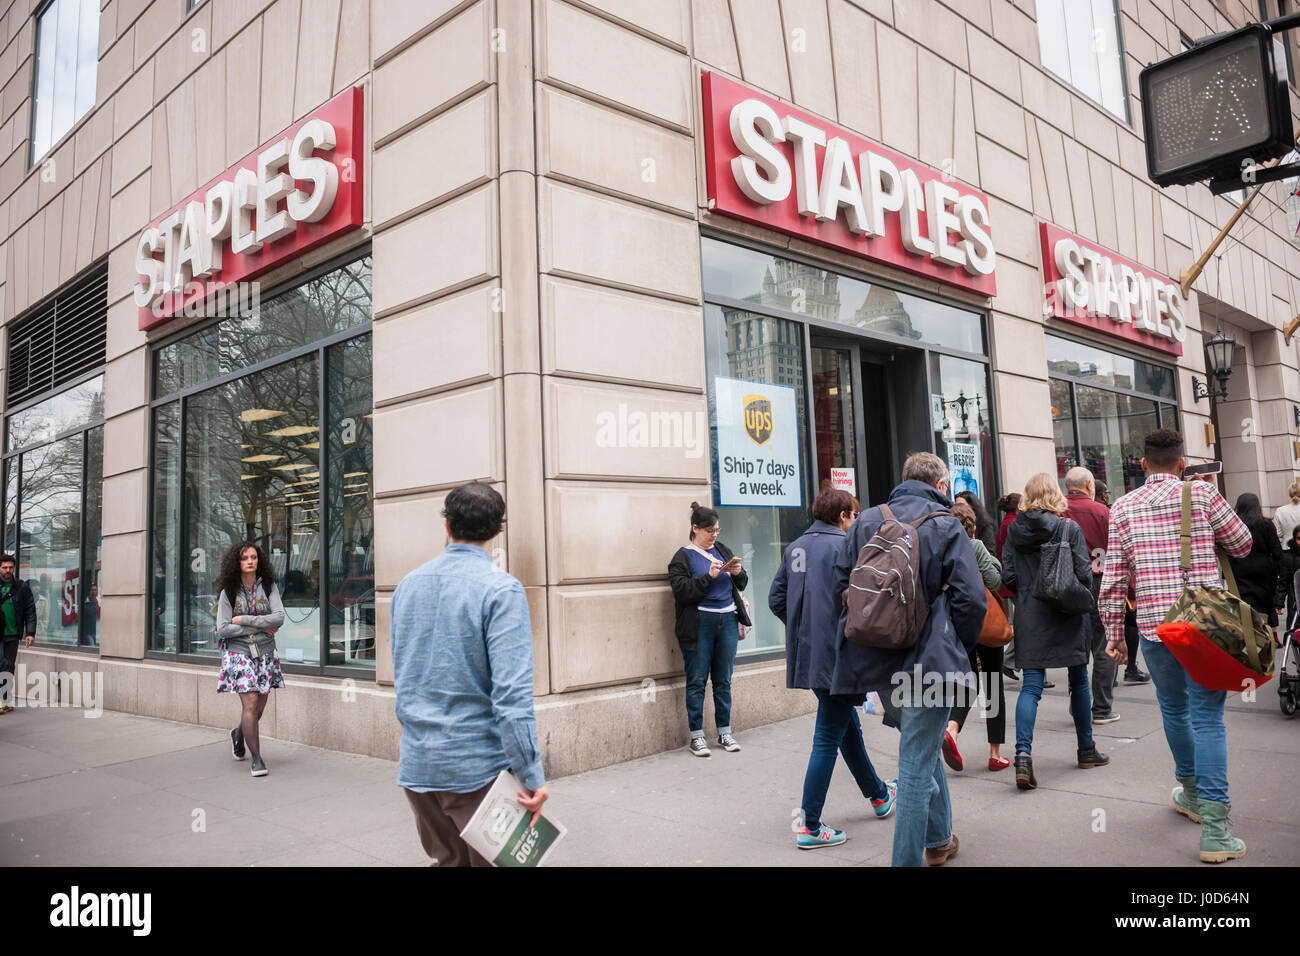 a-staples-office-supply-store-in-lower-manhattan-in-new-york-on